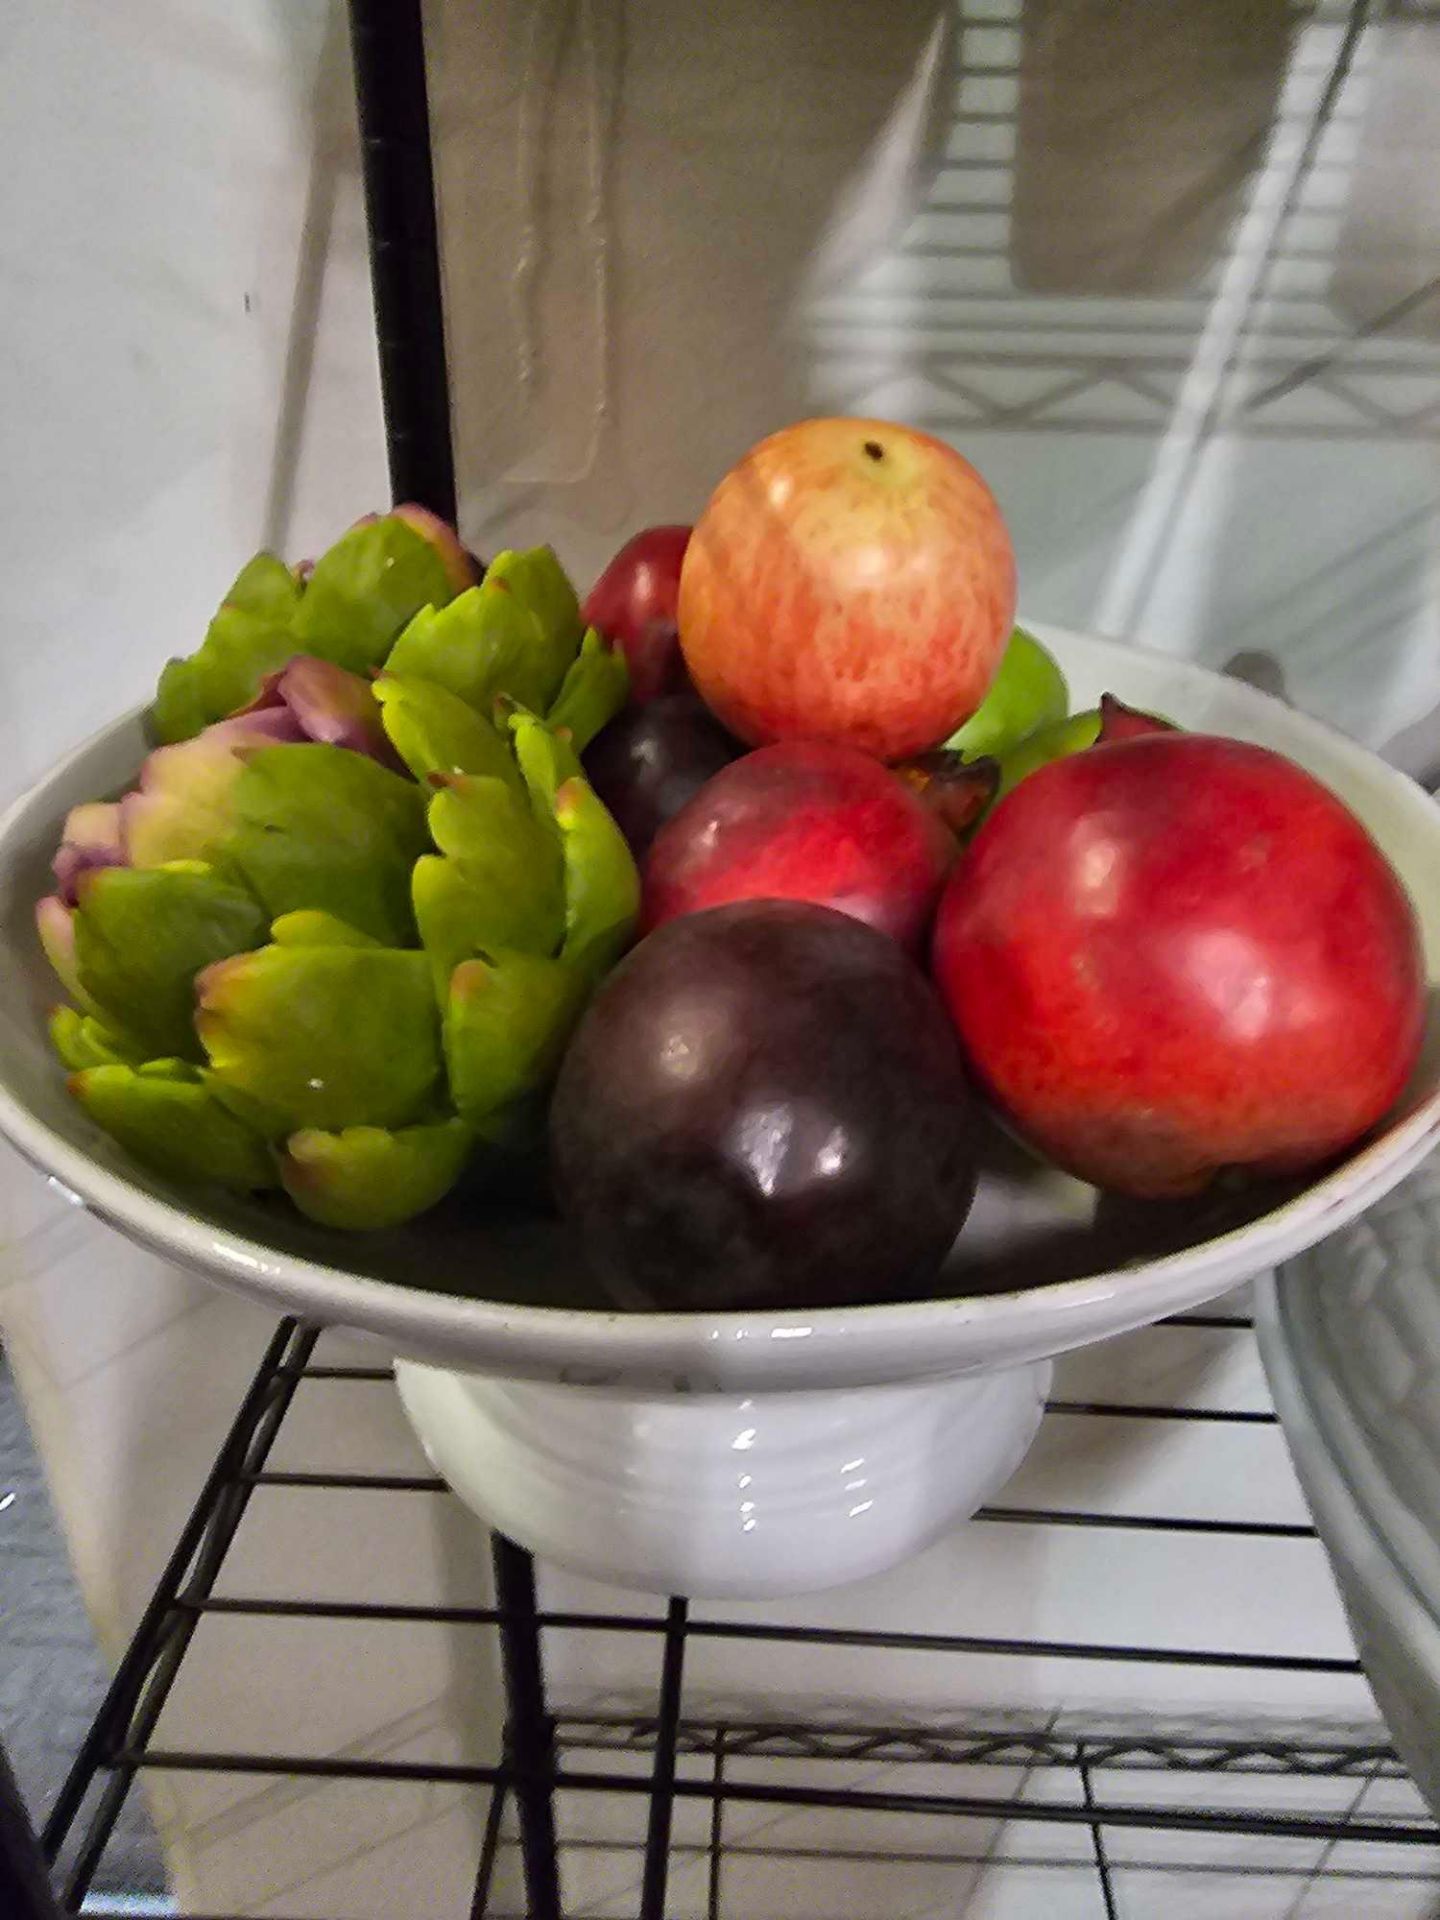 Decorative Objects To Include A White Foot Ceramic Bowl With Faux Fruit As Photographed, A Ceramic - Image 2 of 4